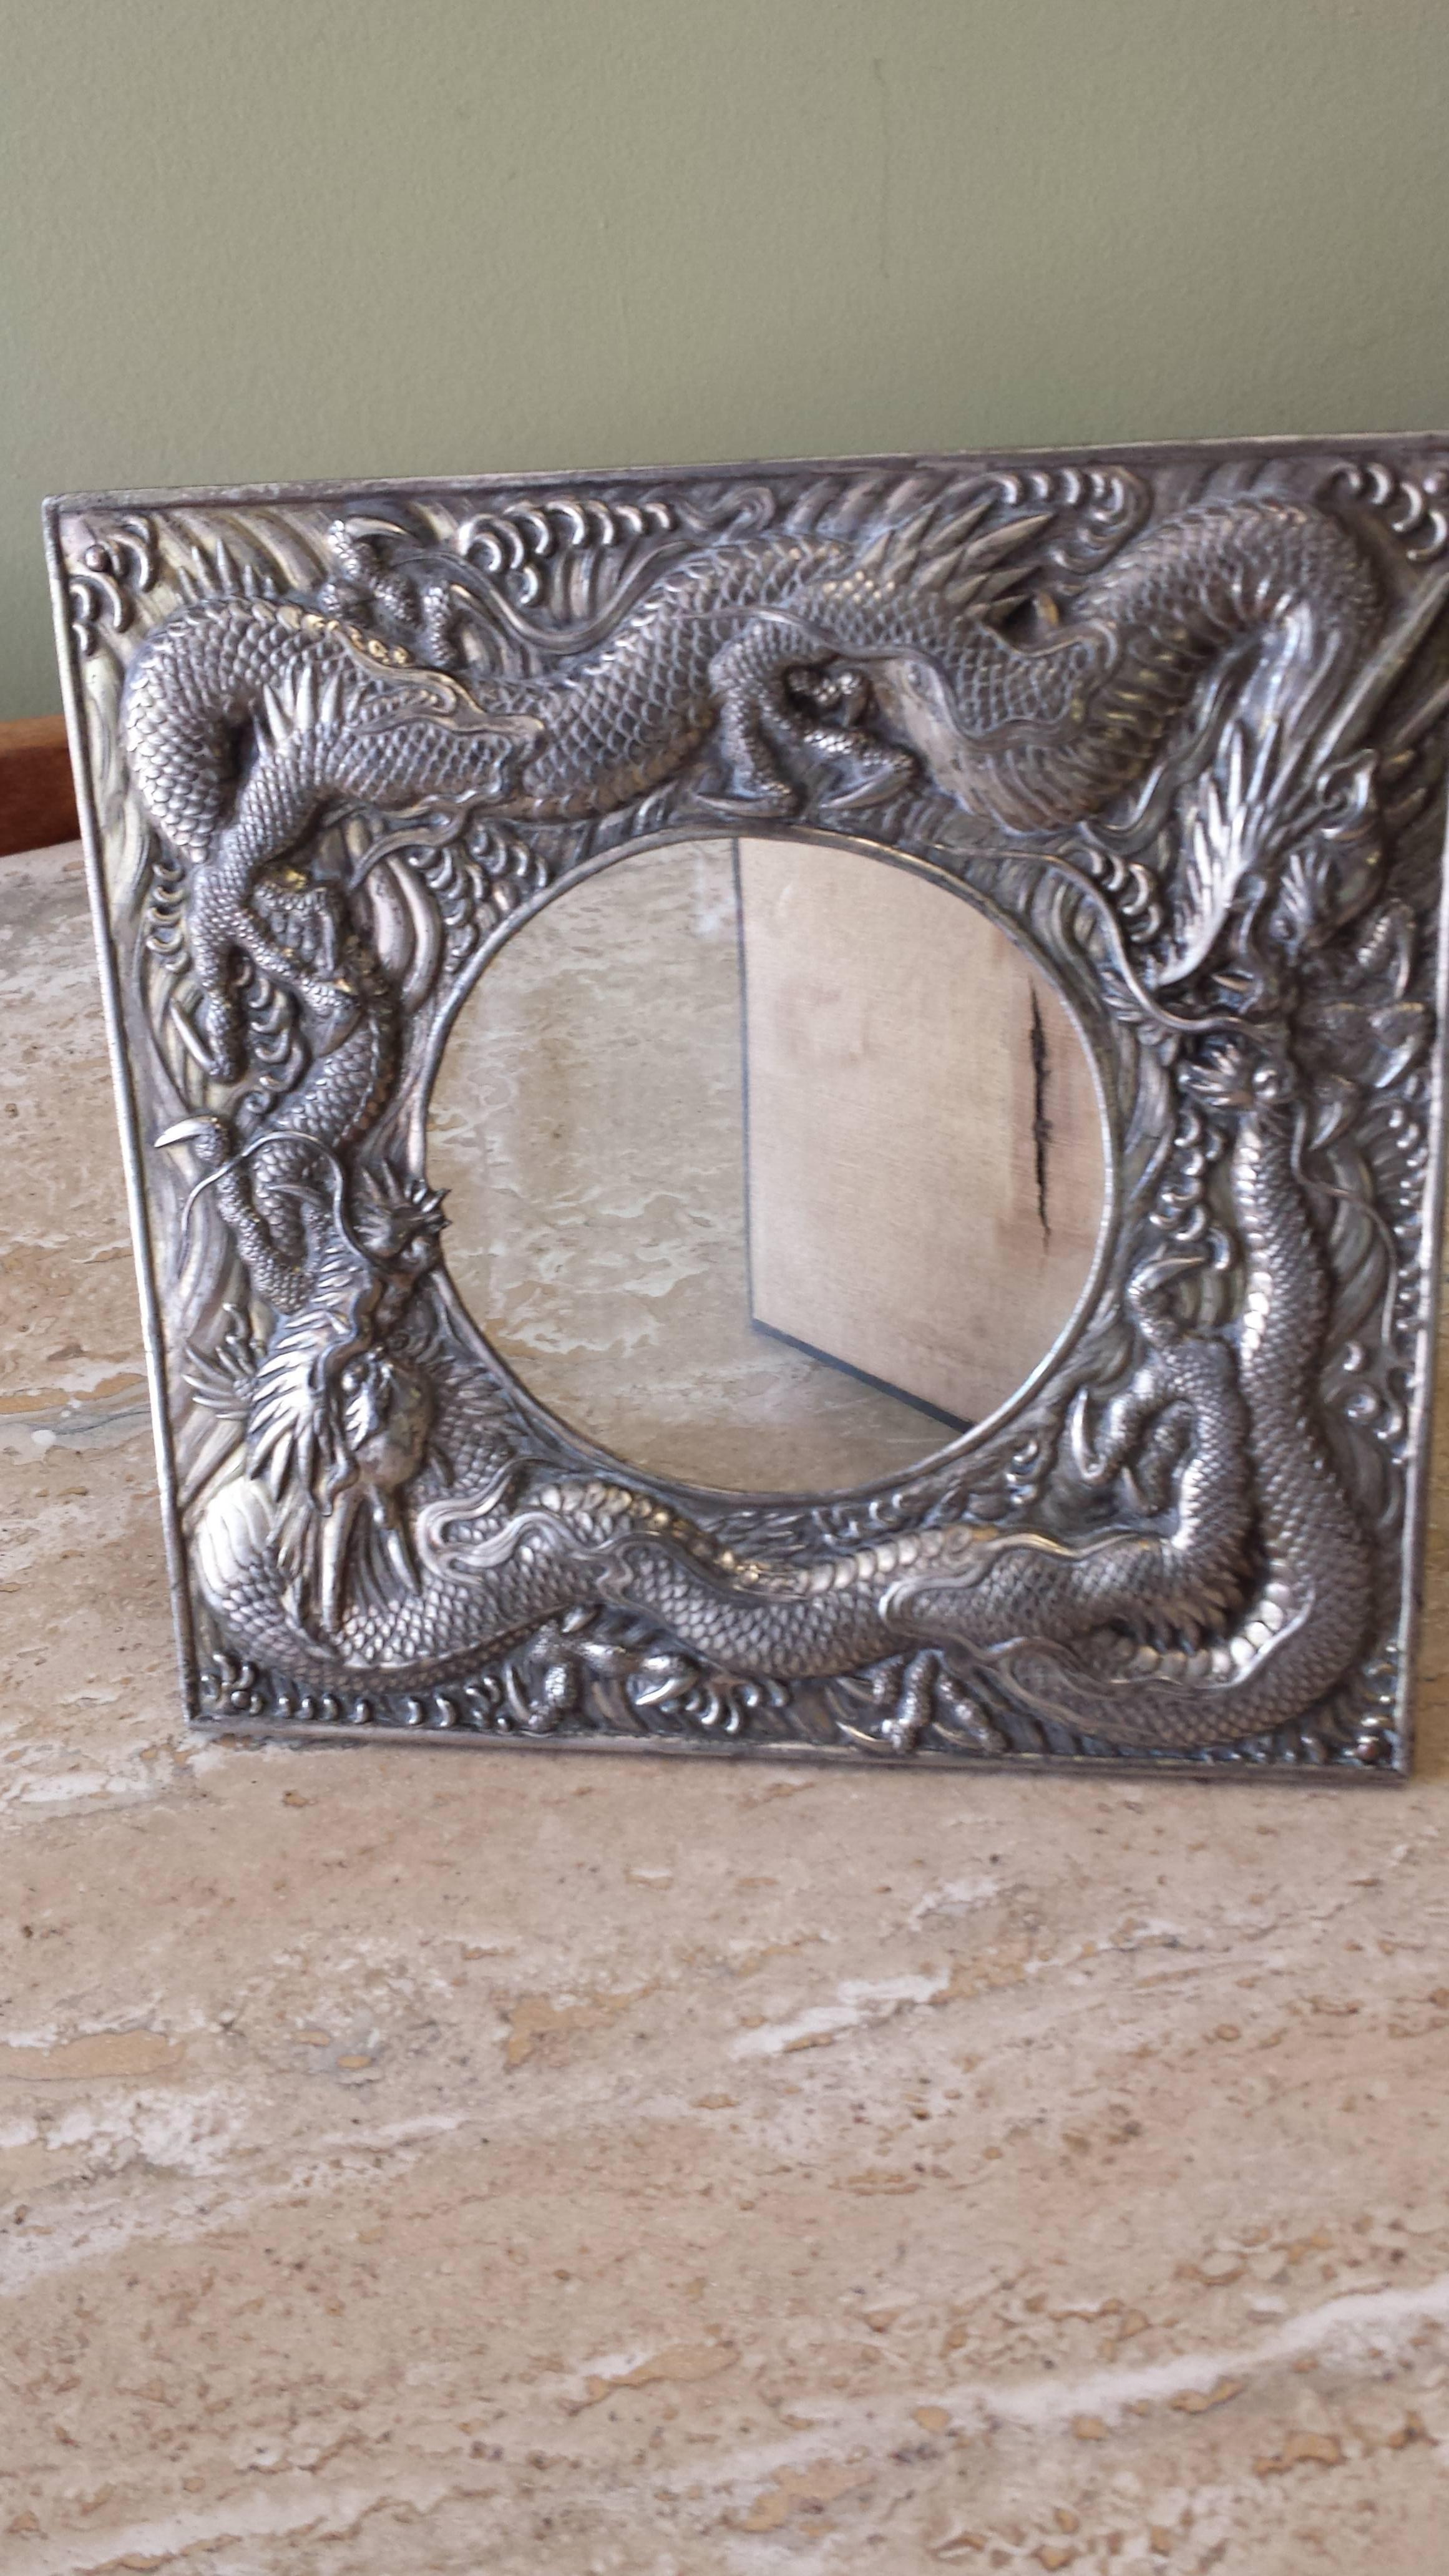 20th Century Stunning Double Dragon Picture Frame in a Silver/Gilt Old Finish circa 1900-1910